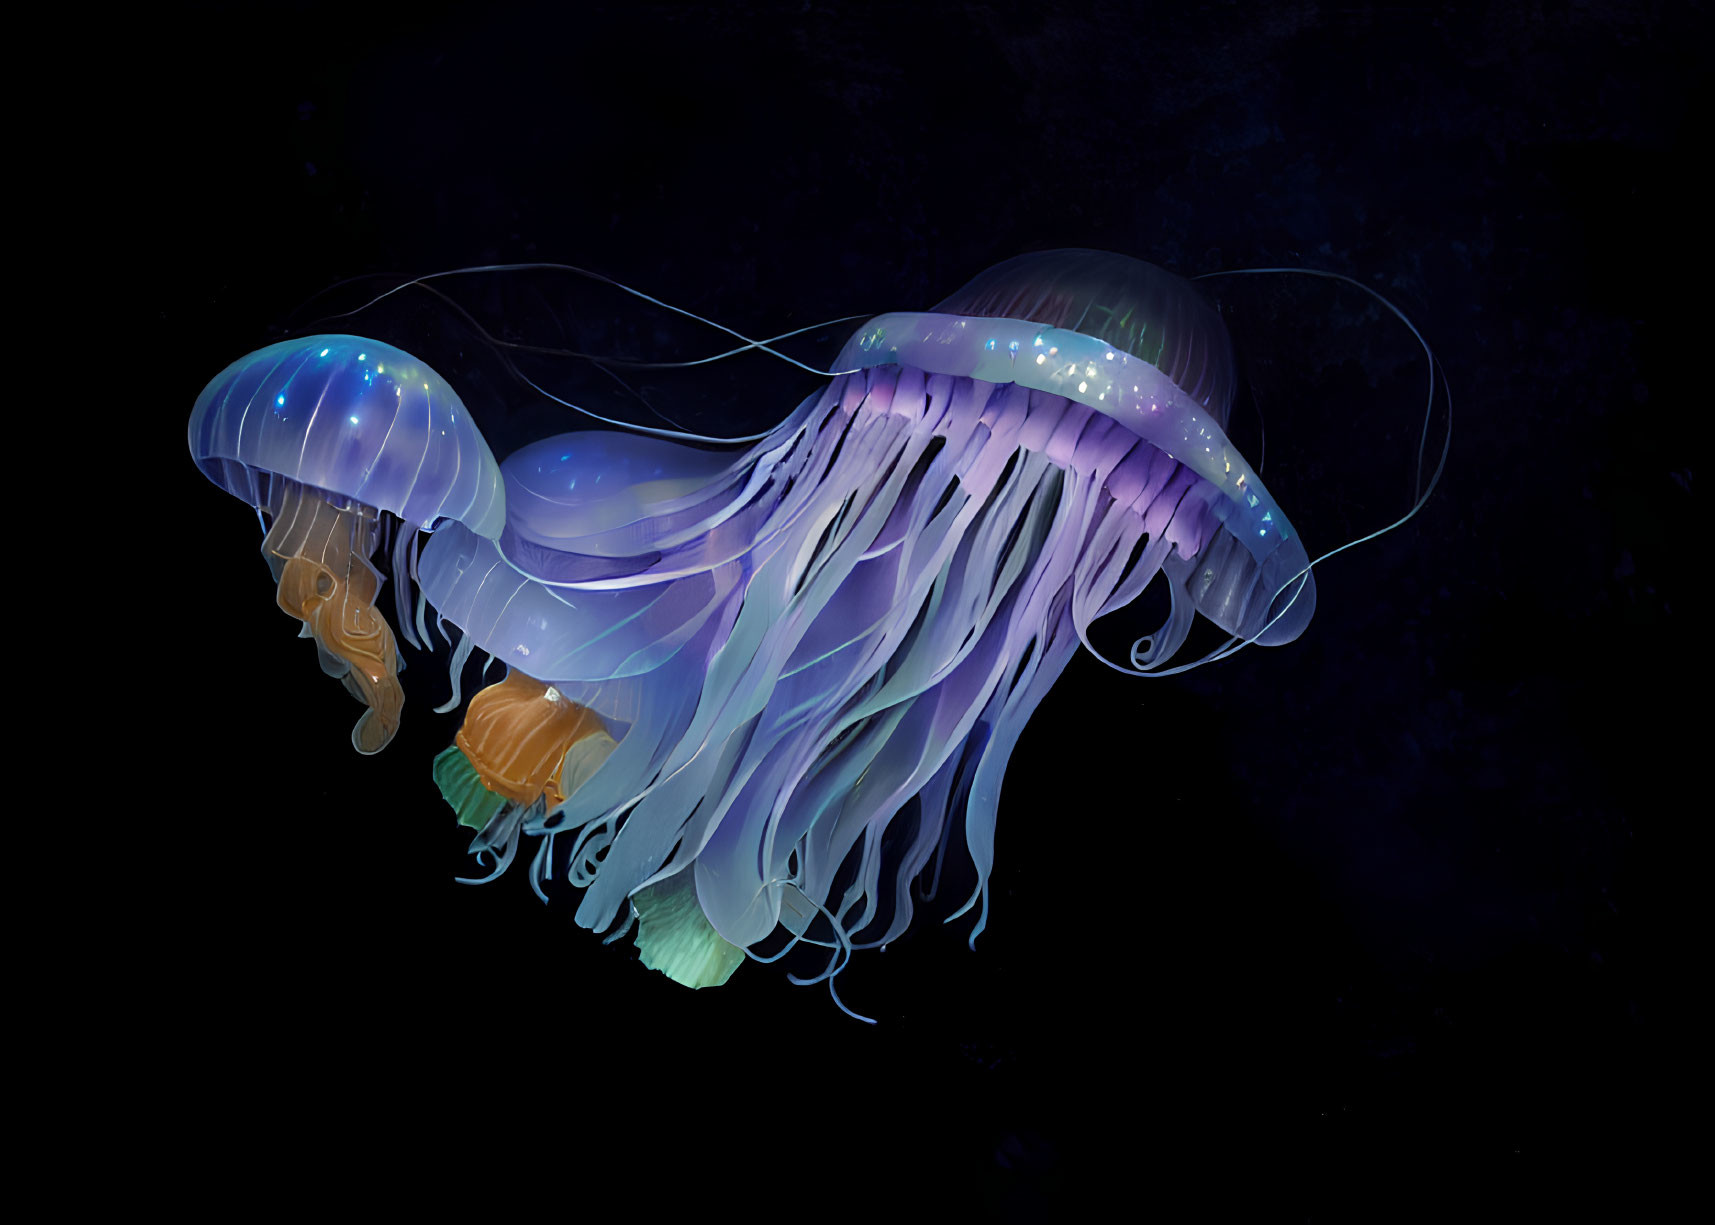 Bioluminescent jellyfish with glowing tentacles in virtual art